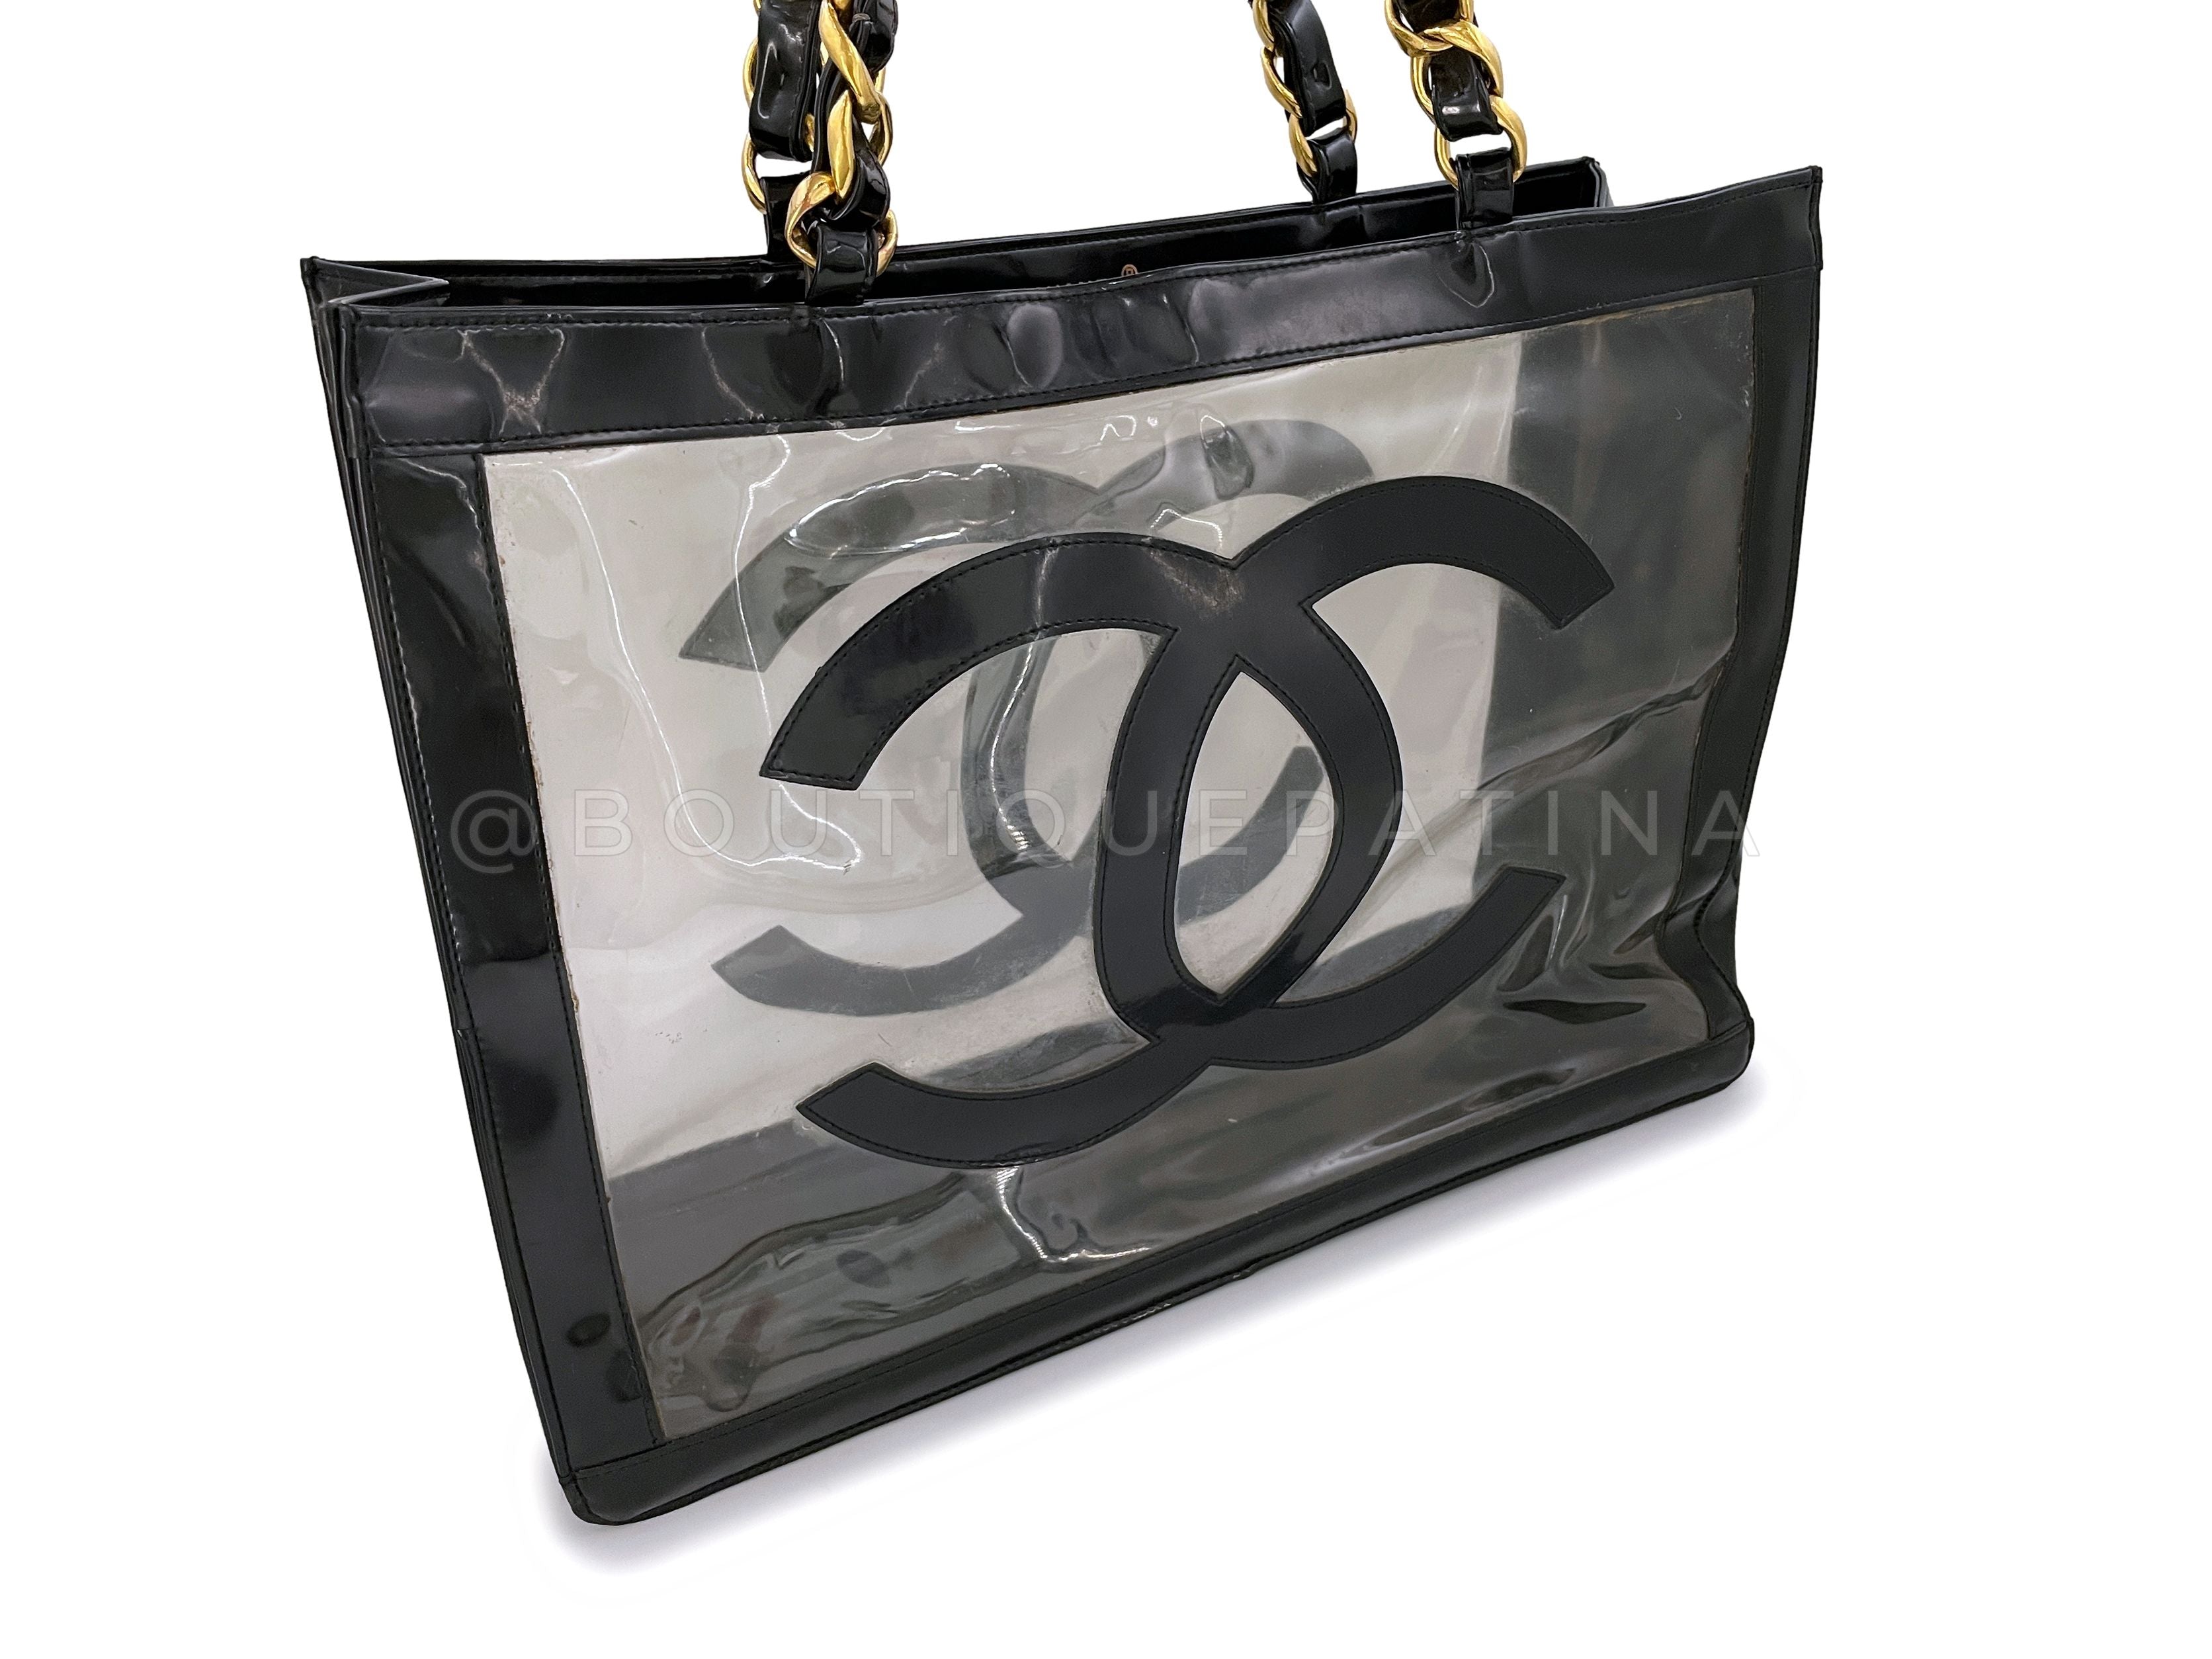 Chanel Vintage Clear Black Patent PVC Chunky Chain Tote Bag 24k GHW